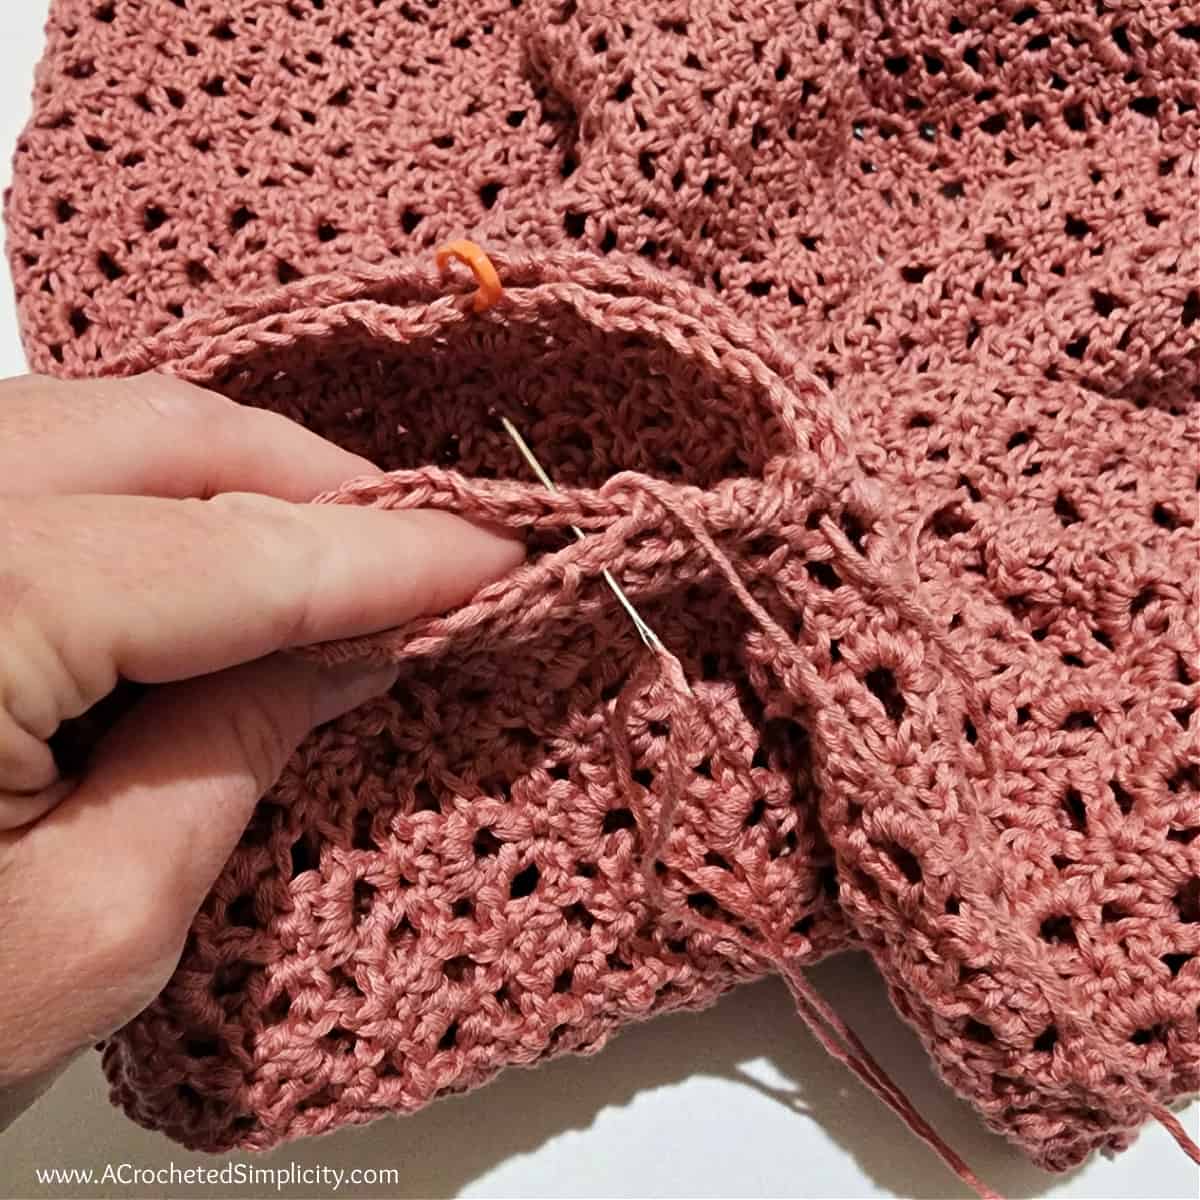 The sleeve is being attached to the armhole opening on the cardigan with a yarn needle and whipstitch.